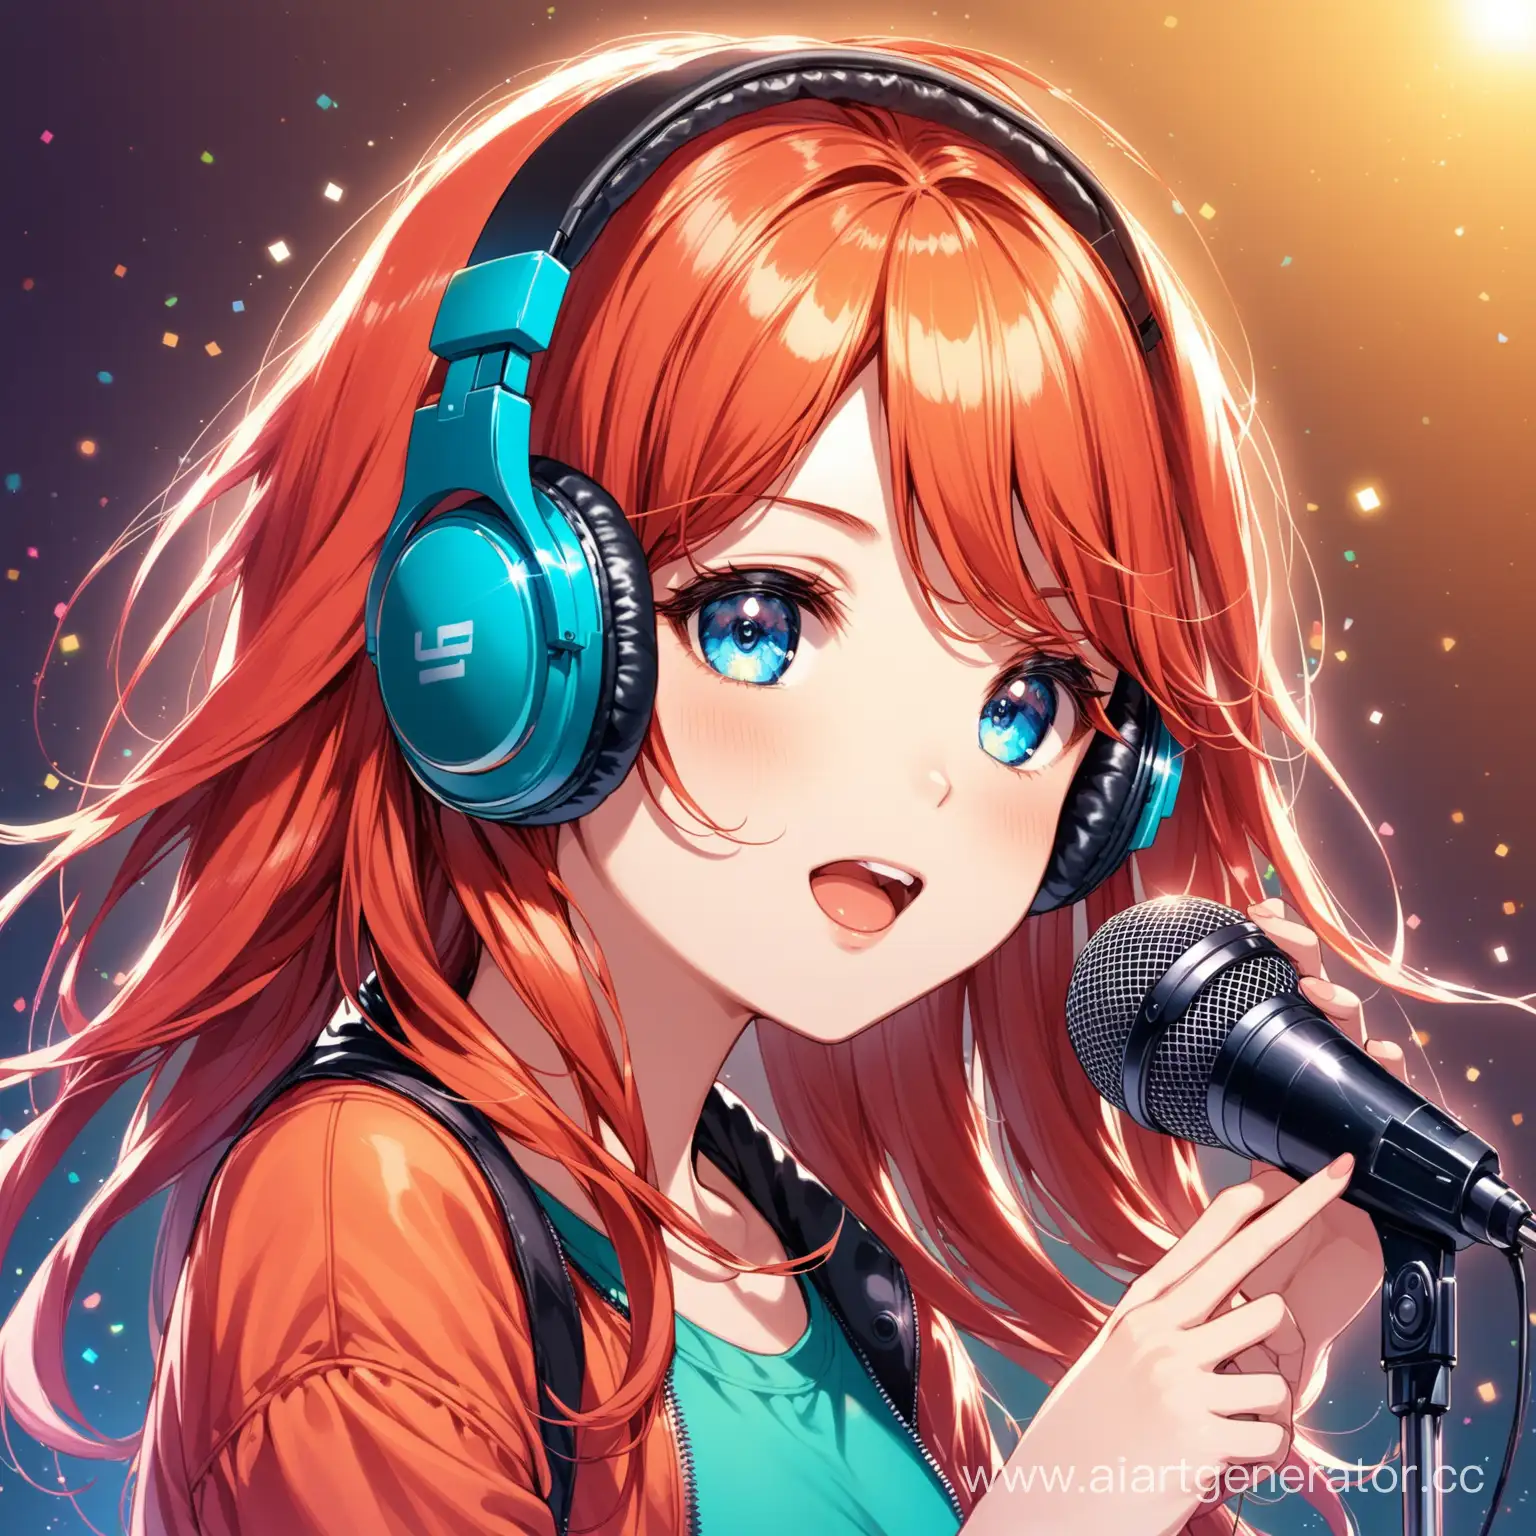 Young-Girl-Singing-with-Microphone-and-Headphones